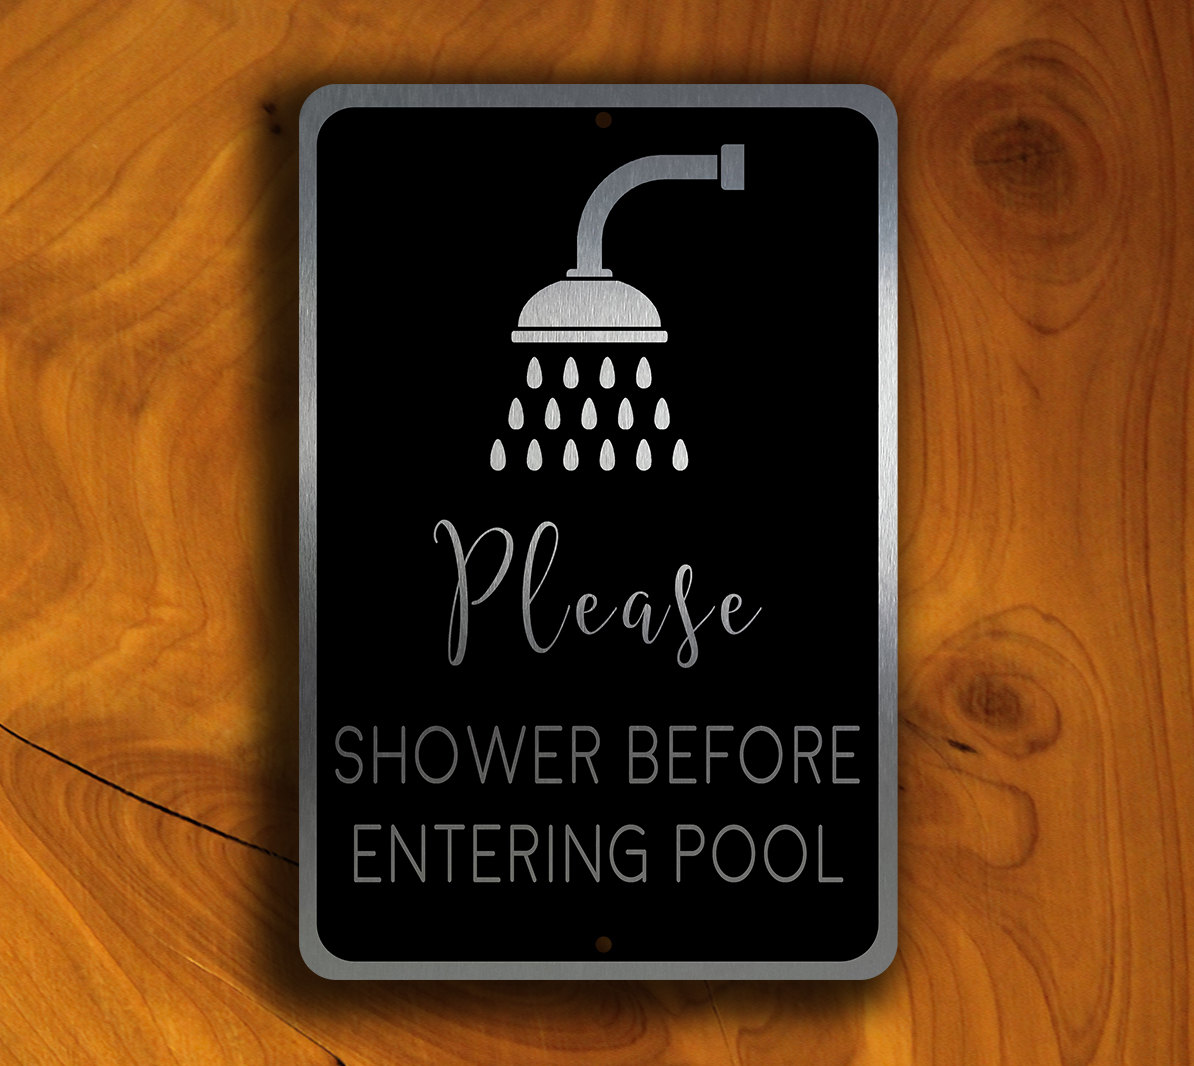 POOL SIGNS - Please SHOWER Before Enetring the Pool